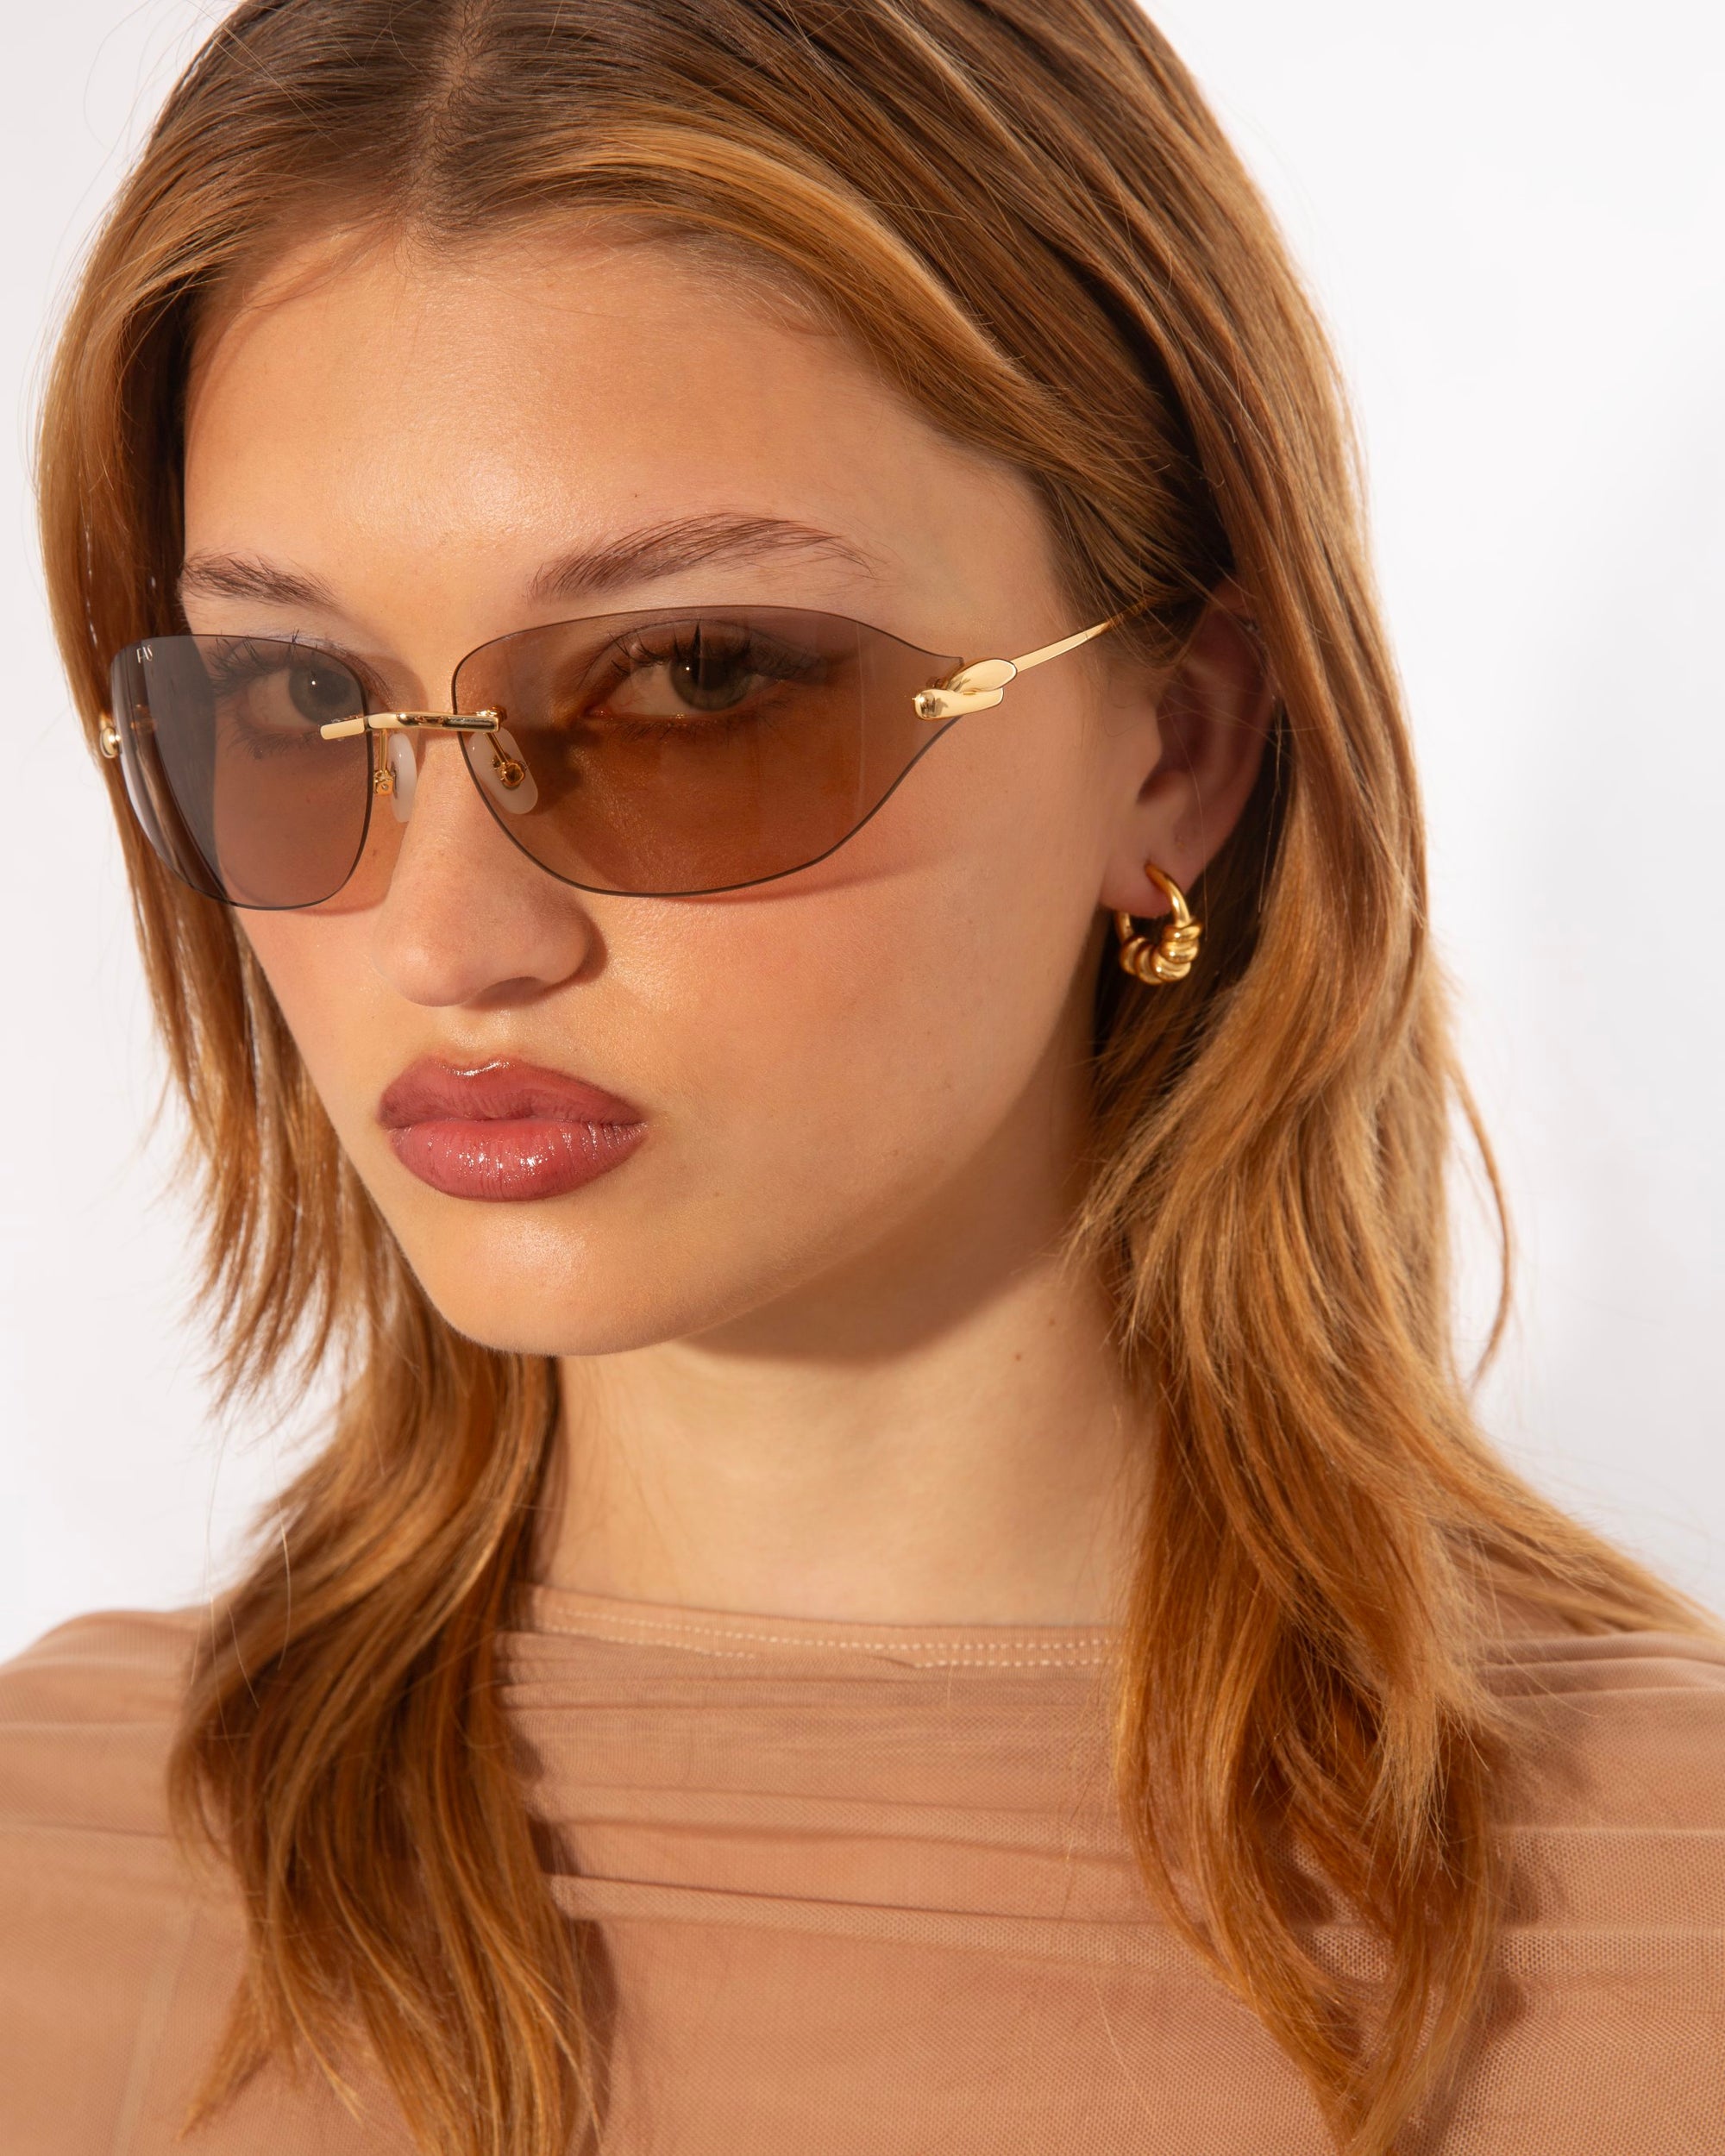 A woman with shoulder-length light brown hair is wearing stylish, For Art&#39;s Sake® Serpent I sunglasses and small gold hoop earrings. She is dressed in a light brown sheer top and is posing against a plain white background.